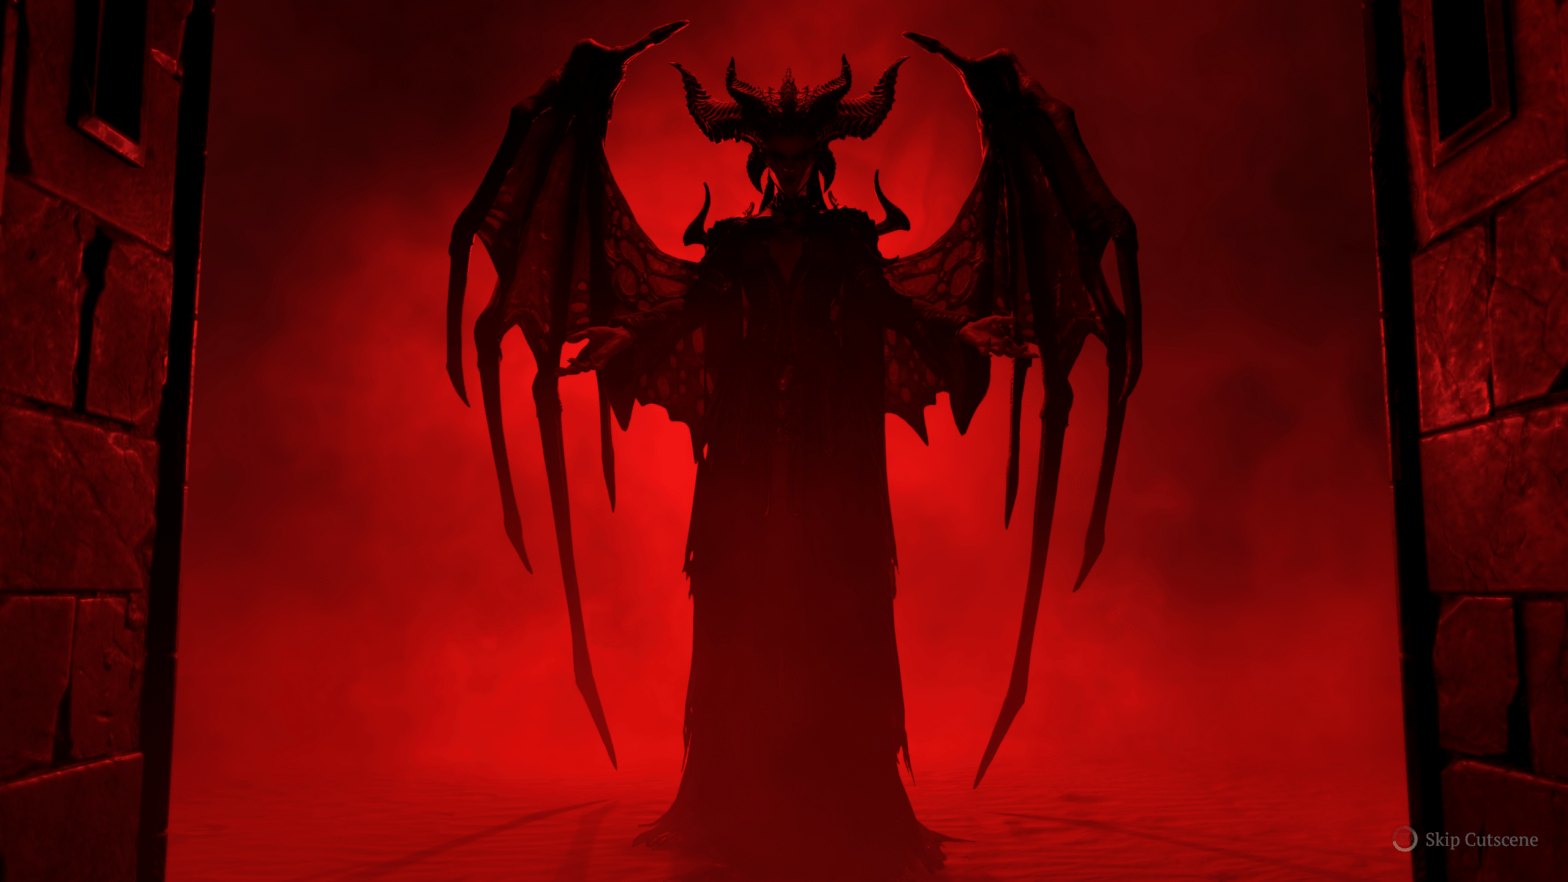 Lilith the daughter of Hatred, mother of sanctuary and villain of Diablo 4, in a backdrop of red and black.